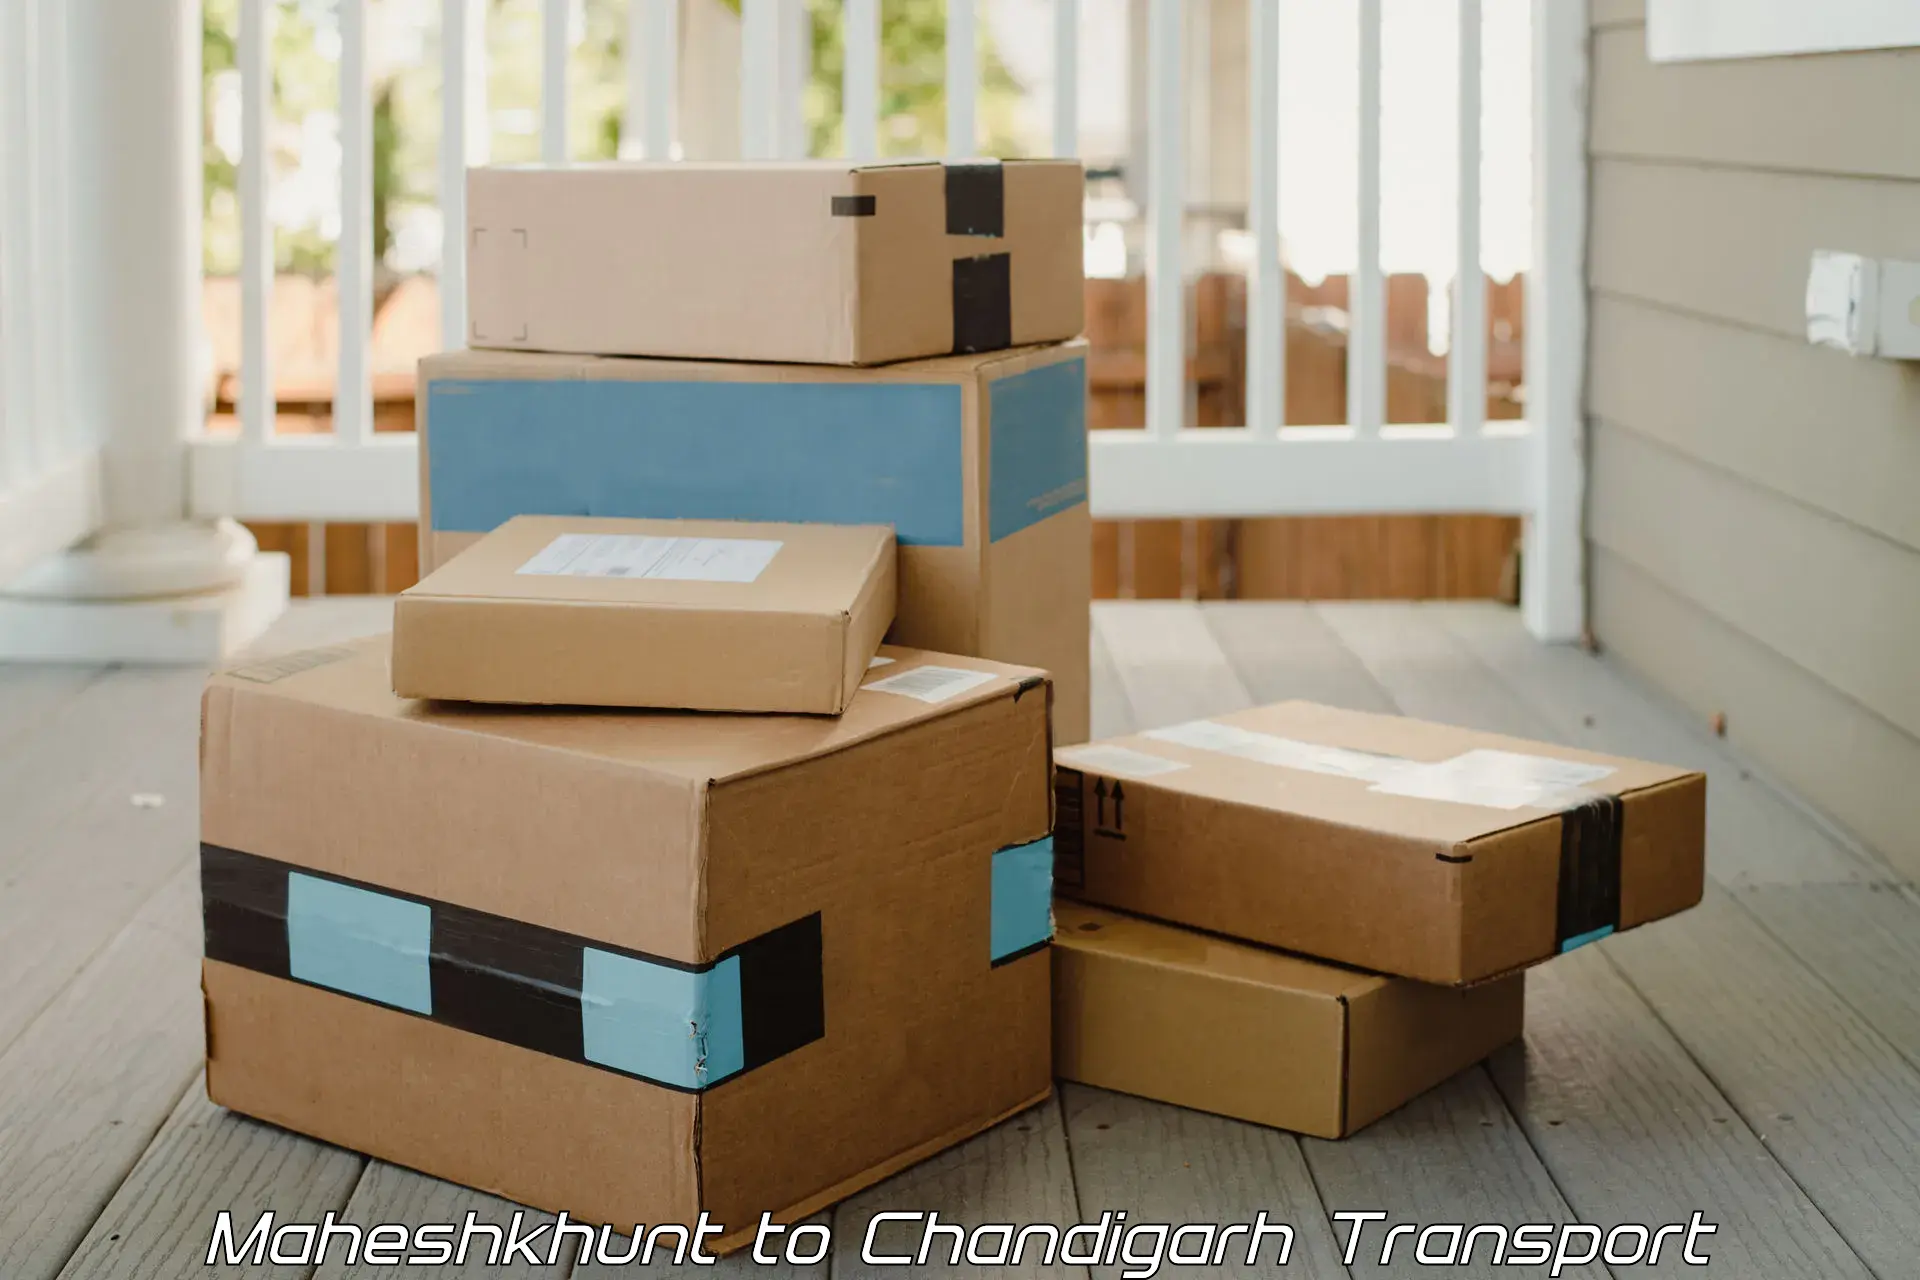 Land transport services in Maheshkhunt to Chandigarh